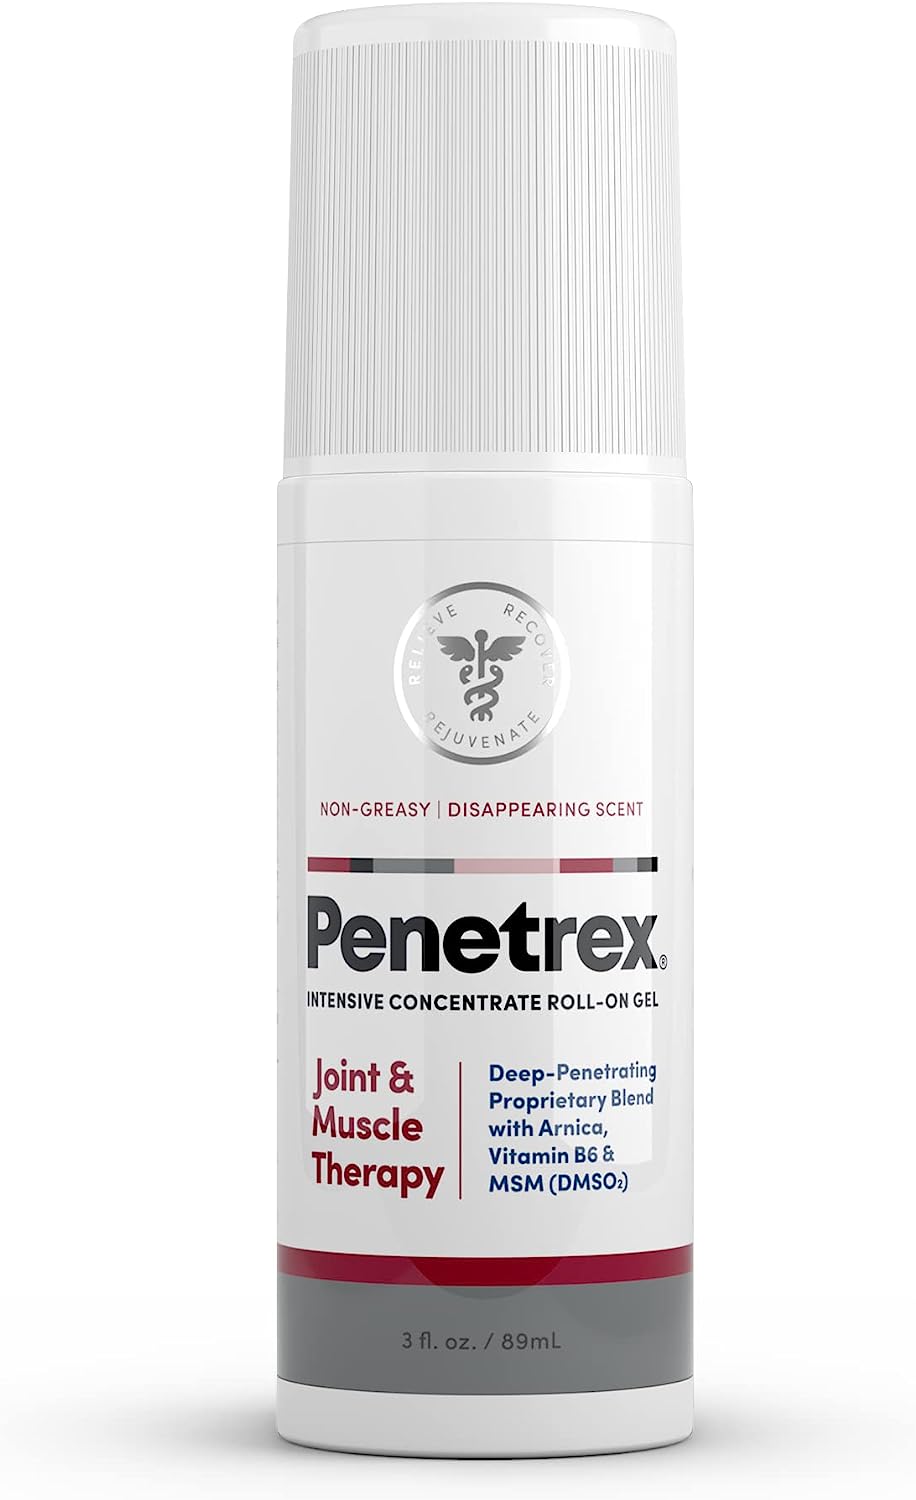 Penetrex Joint & Muscle Therapy Roll On ? Soothing Gel for Back, Neck, Hands, Feet ? Premium Whole Body Rub with Arnica, Vitamin B6 MSM & Boswellia ? 3oz